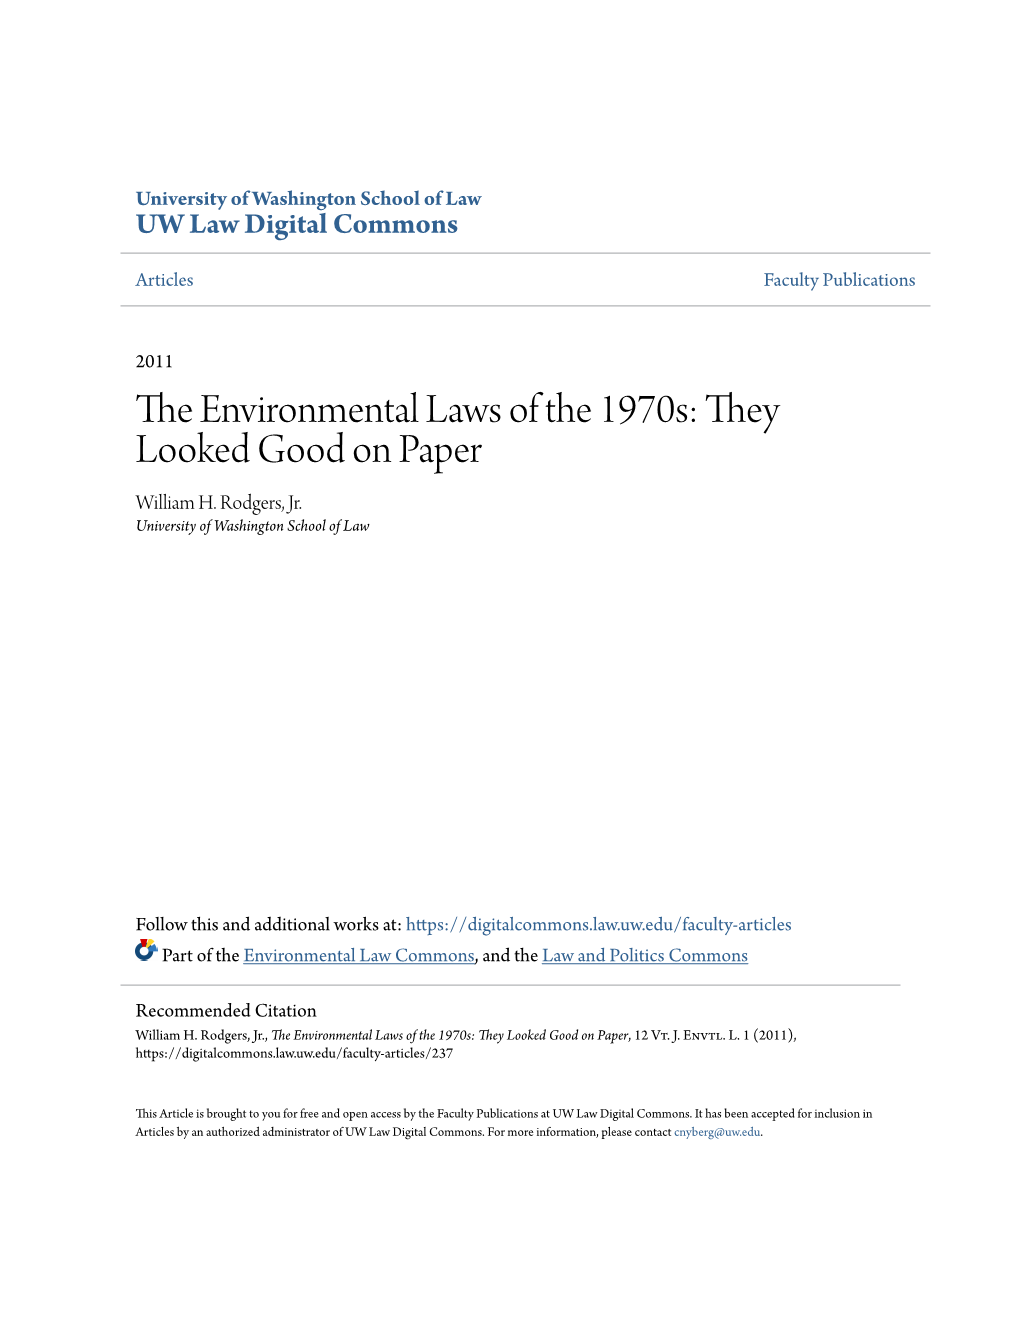 The Environmental Laws of the 1970S: They Looked Good on Paper, 12 Vt